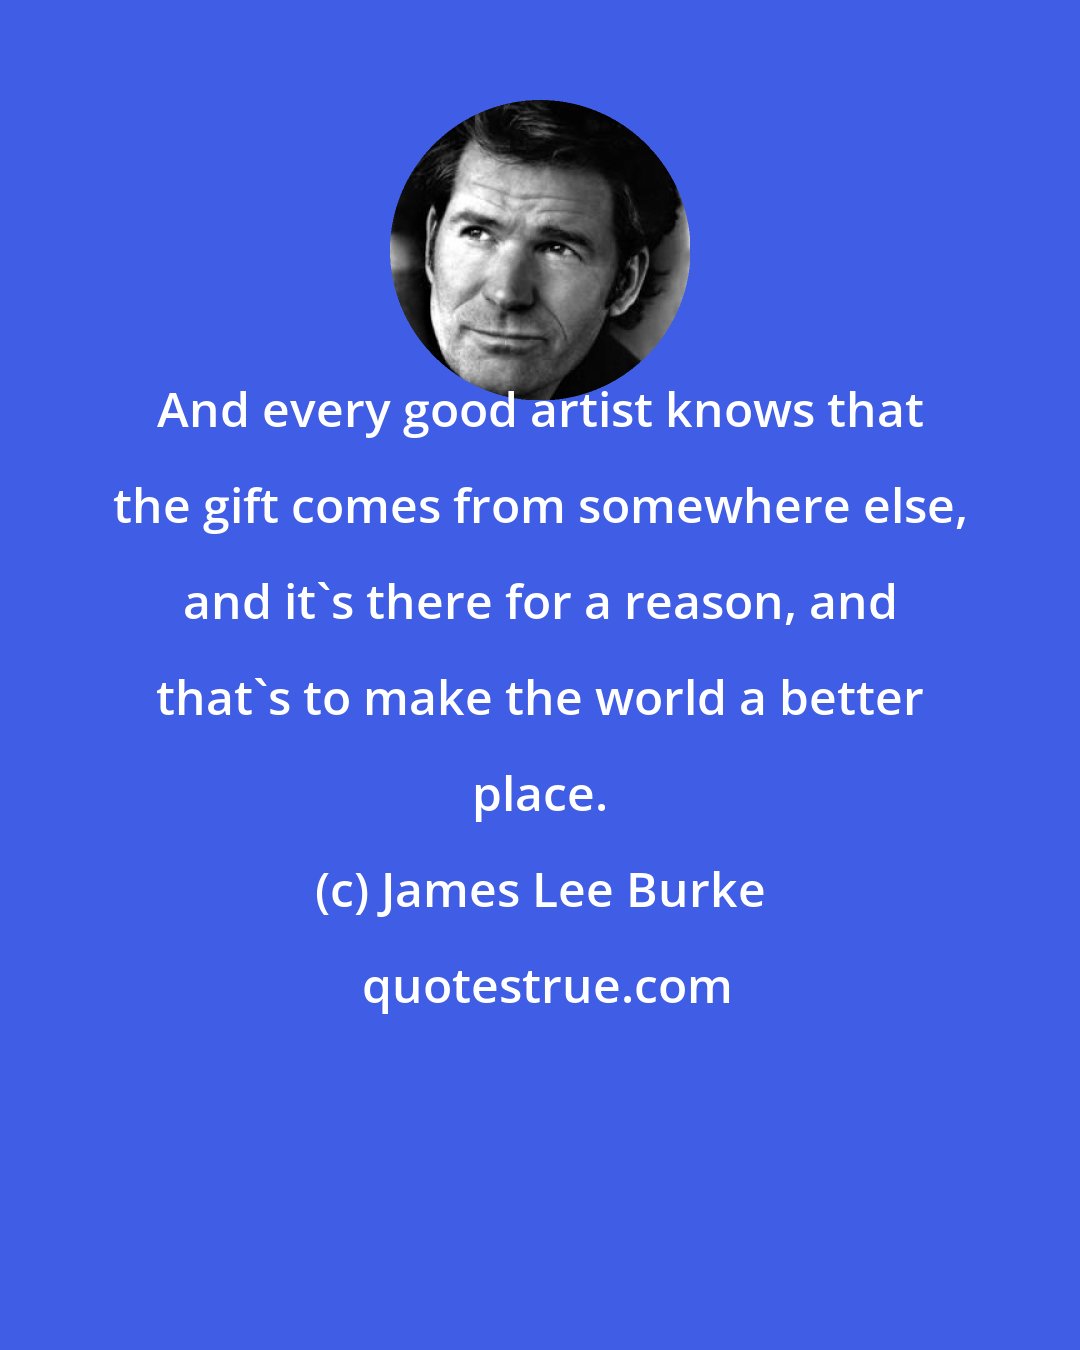 James Lee Burke: And every good artist knows that the gift comes from somewhere else, and it's there for a reason, and that's to make the world a better place.